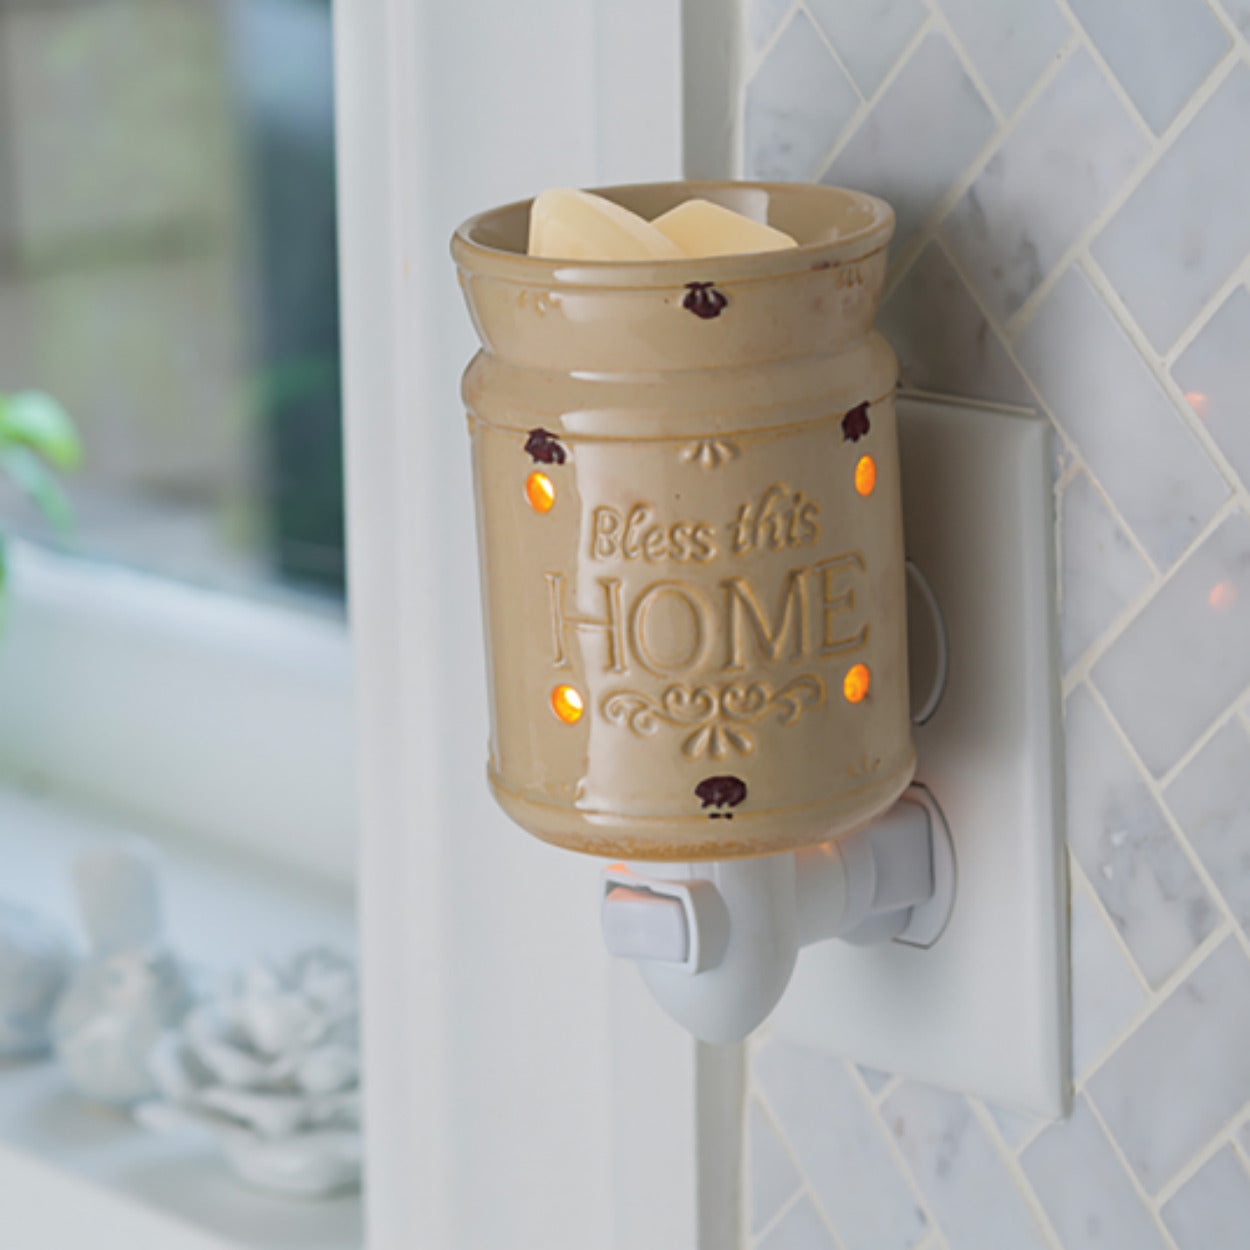 Pluggable Fragrance Warmer Bless This Home Lifestyle